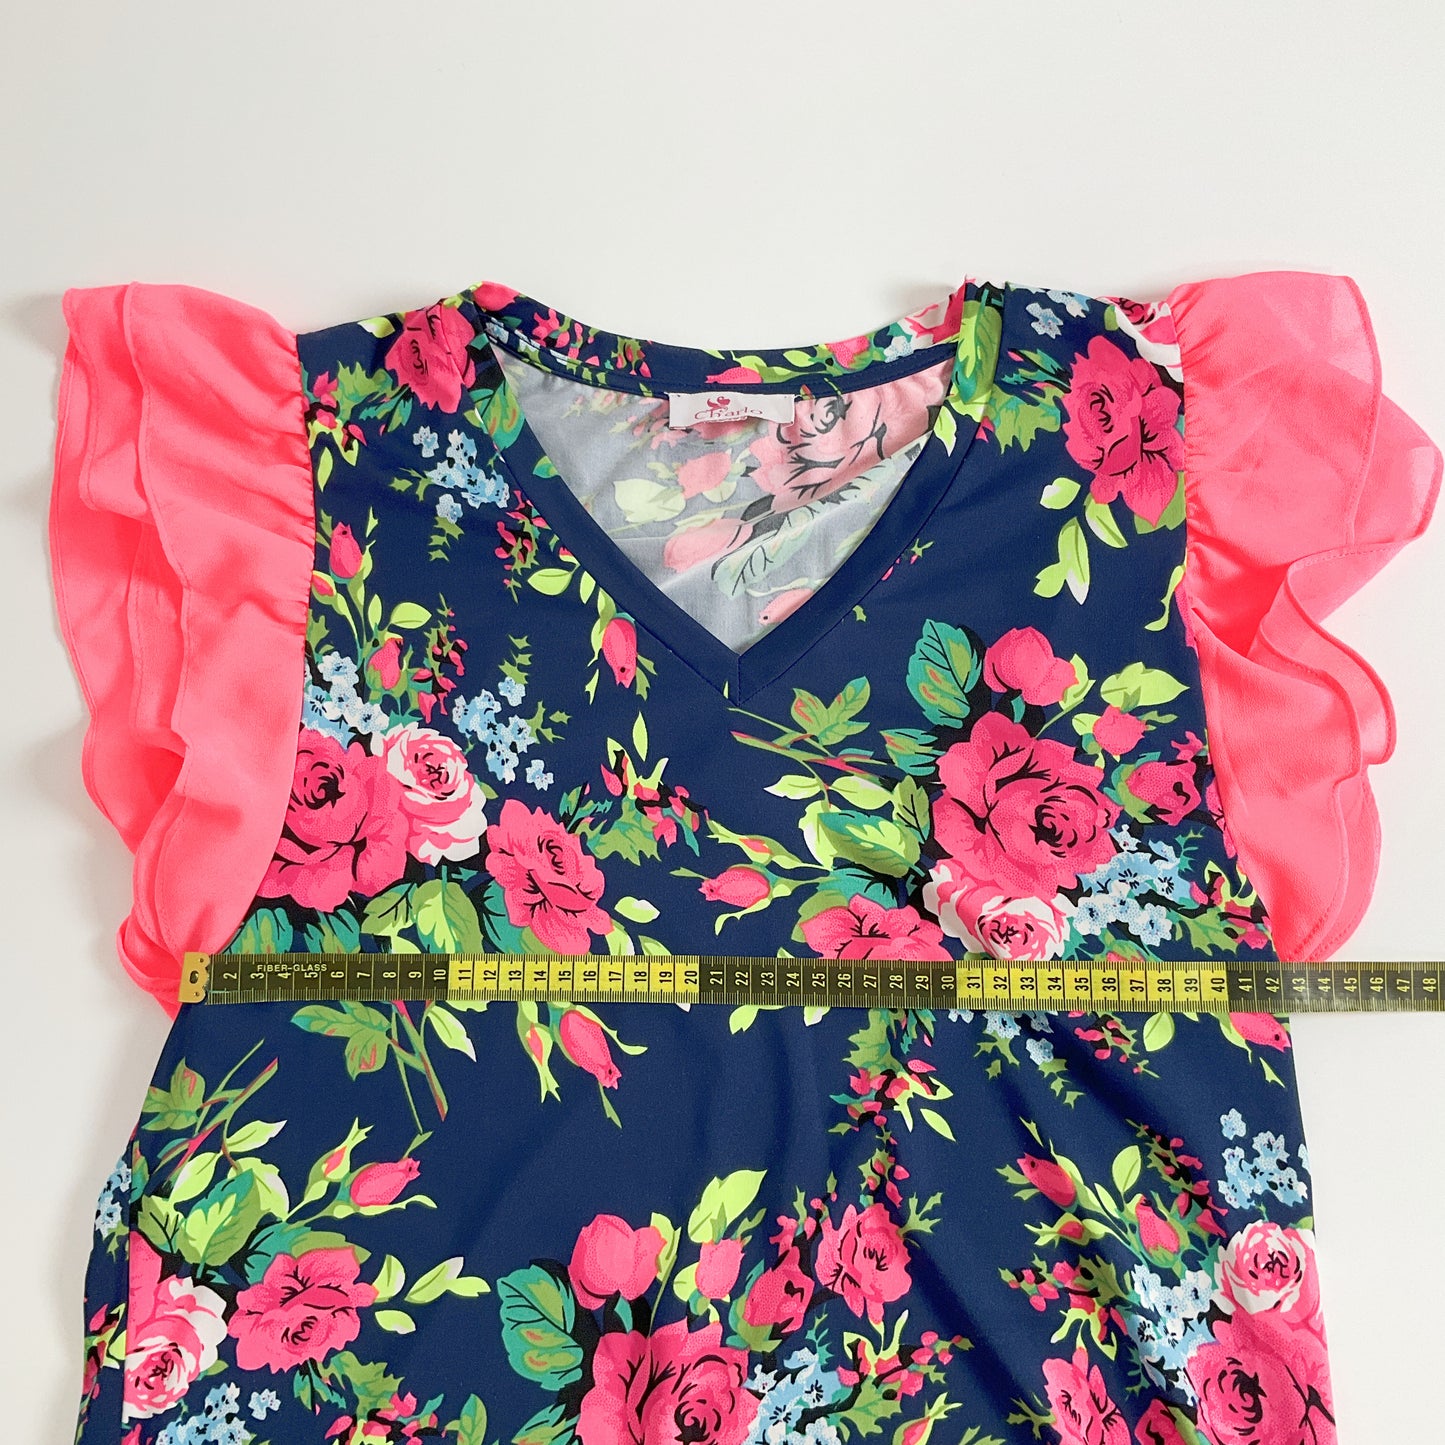 Charlo - Floral women's top